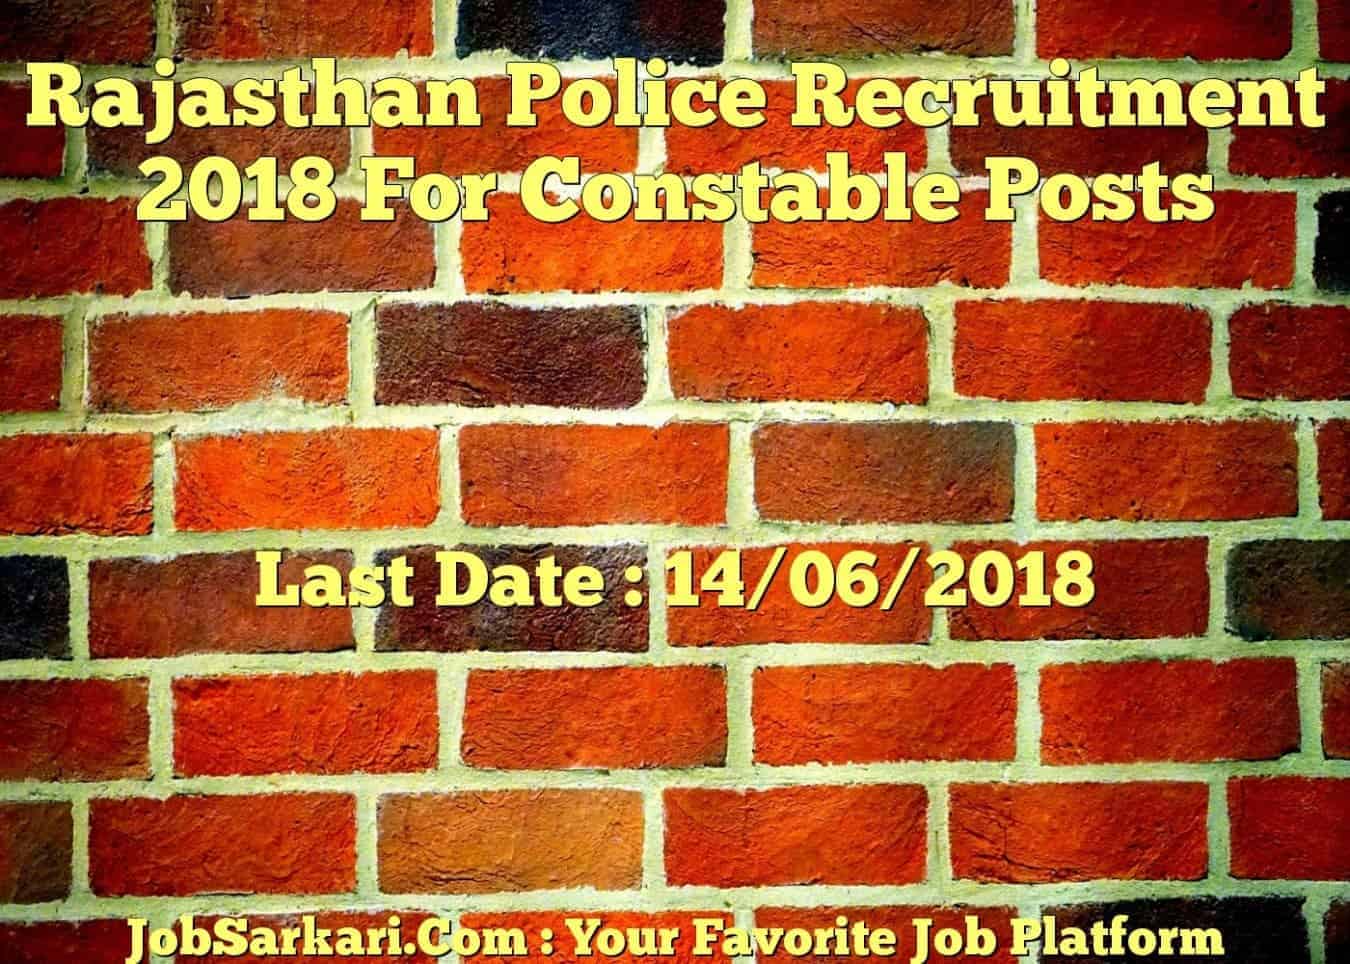 Rajasthan Police Recruitment 2018 For Constable Posts